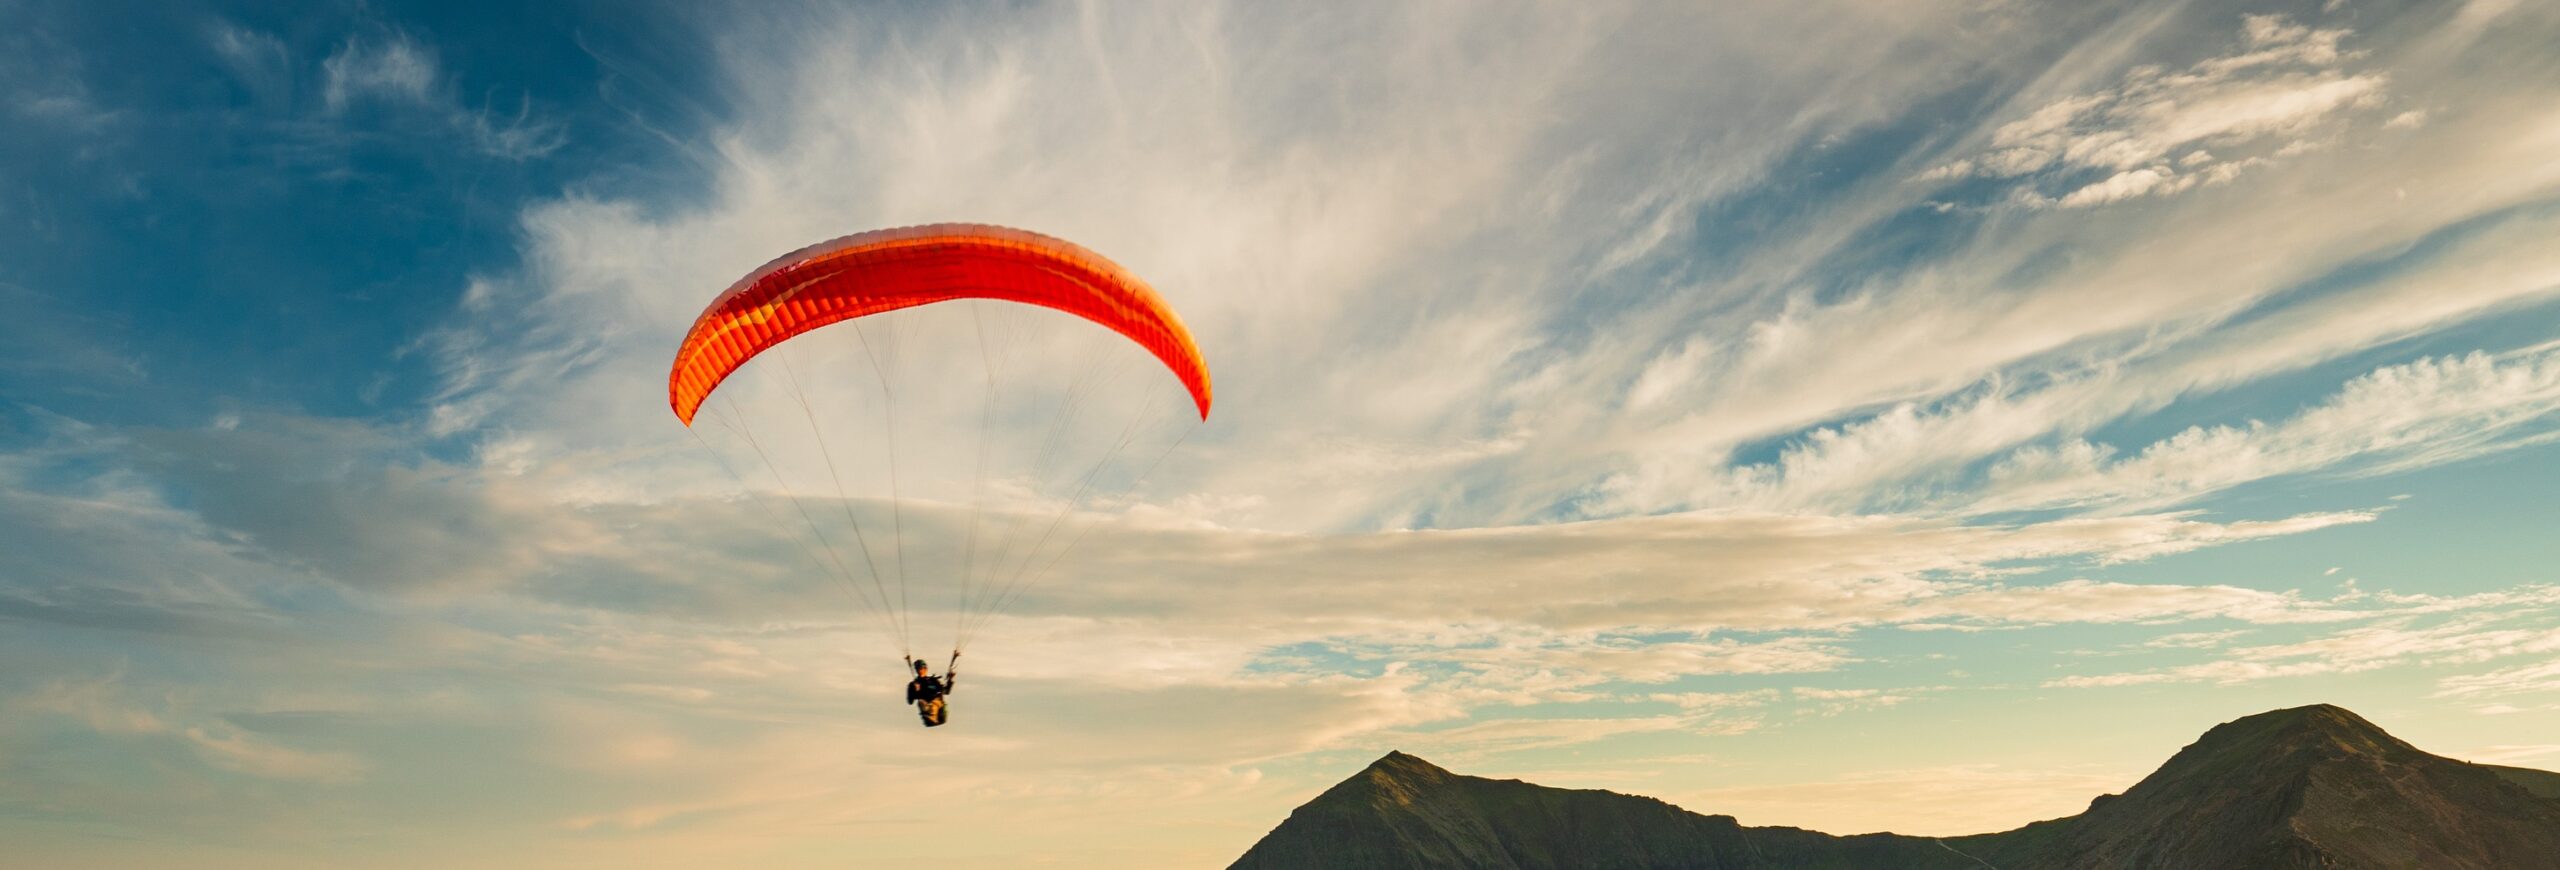 This captivating photo freezes a solitary paraglider in mid-soar against the expansive sky. The distinctive dark mountain peaks are visible, creating a scenic backdrop against the light, airy sky.